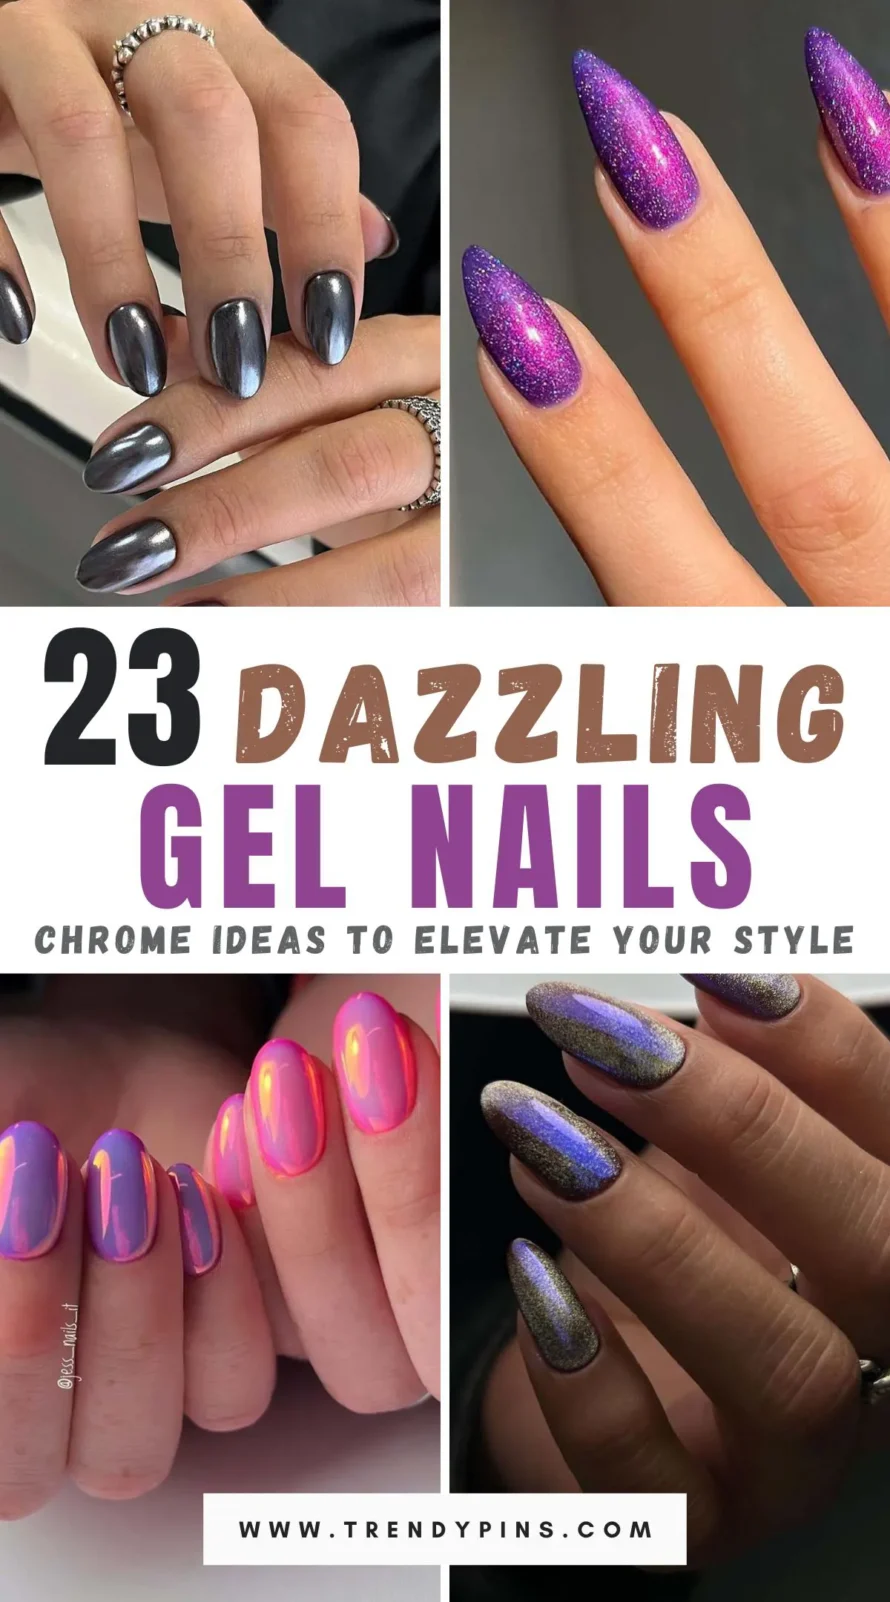 Elevate your style with our 24 dazzling gel nails chrome ideas. Explore a variety of stunning designs that incorporate the reflective, metallic finish of chrome for a sleek and sophisticated look. From holographic hues to bold, shiny colors, discover how these eye-catching nail ideas can add a touch of glamour to your look.